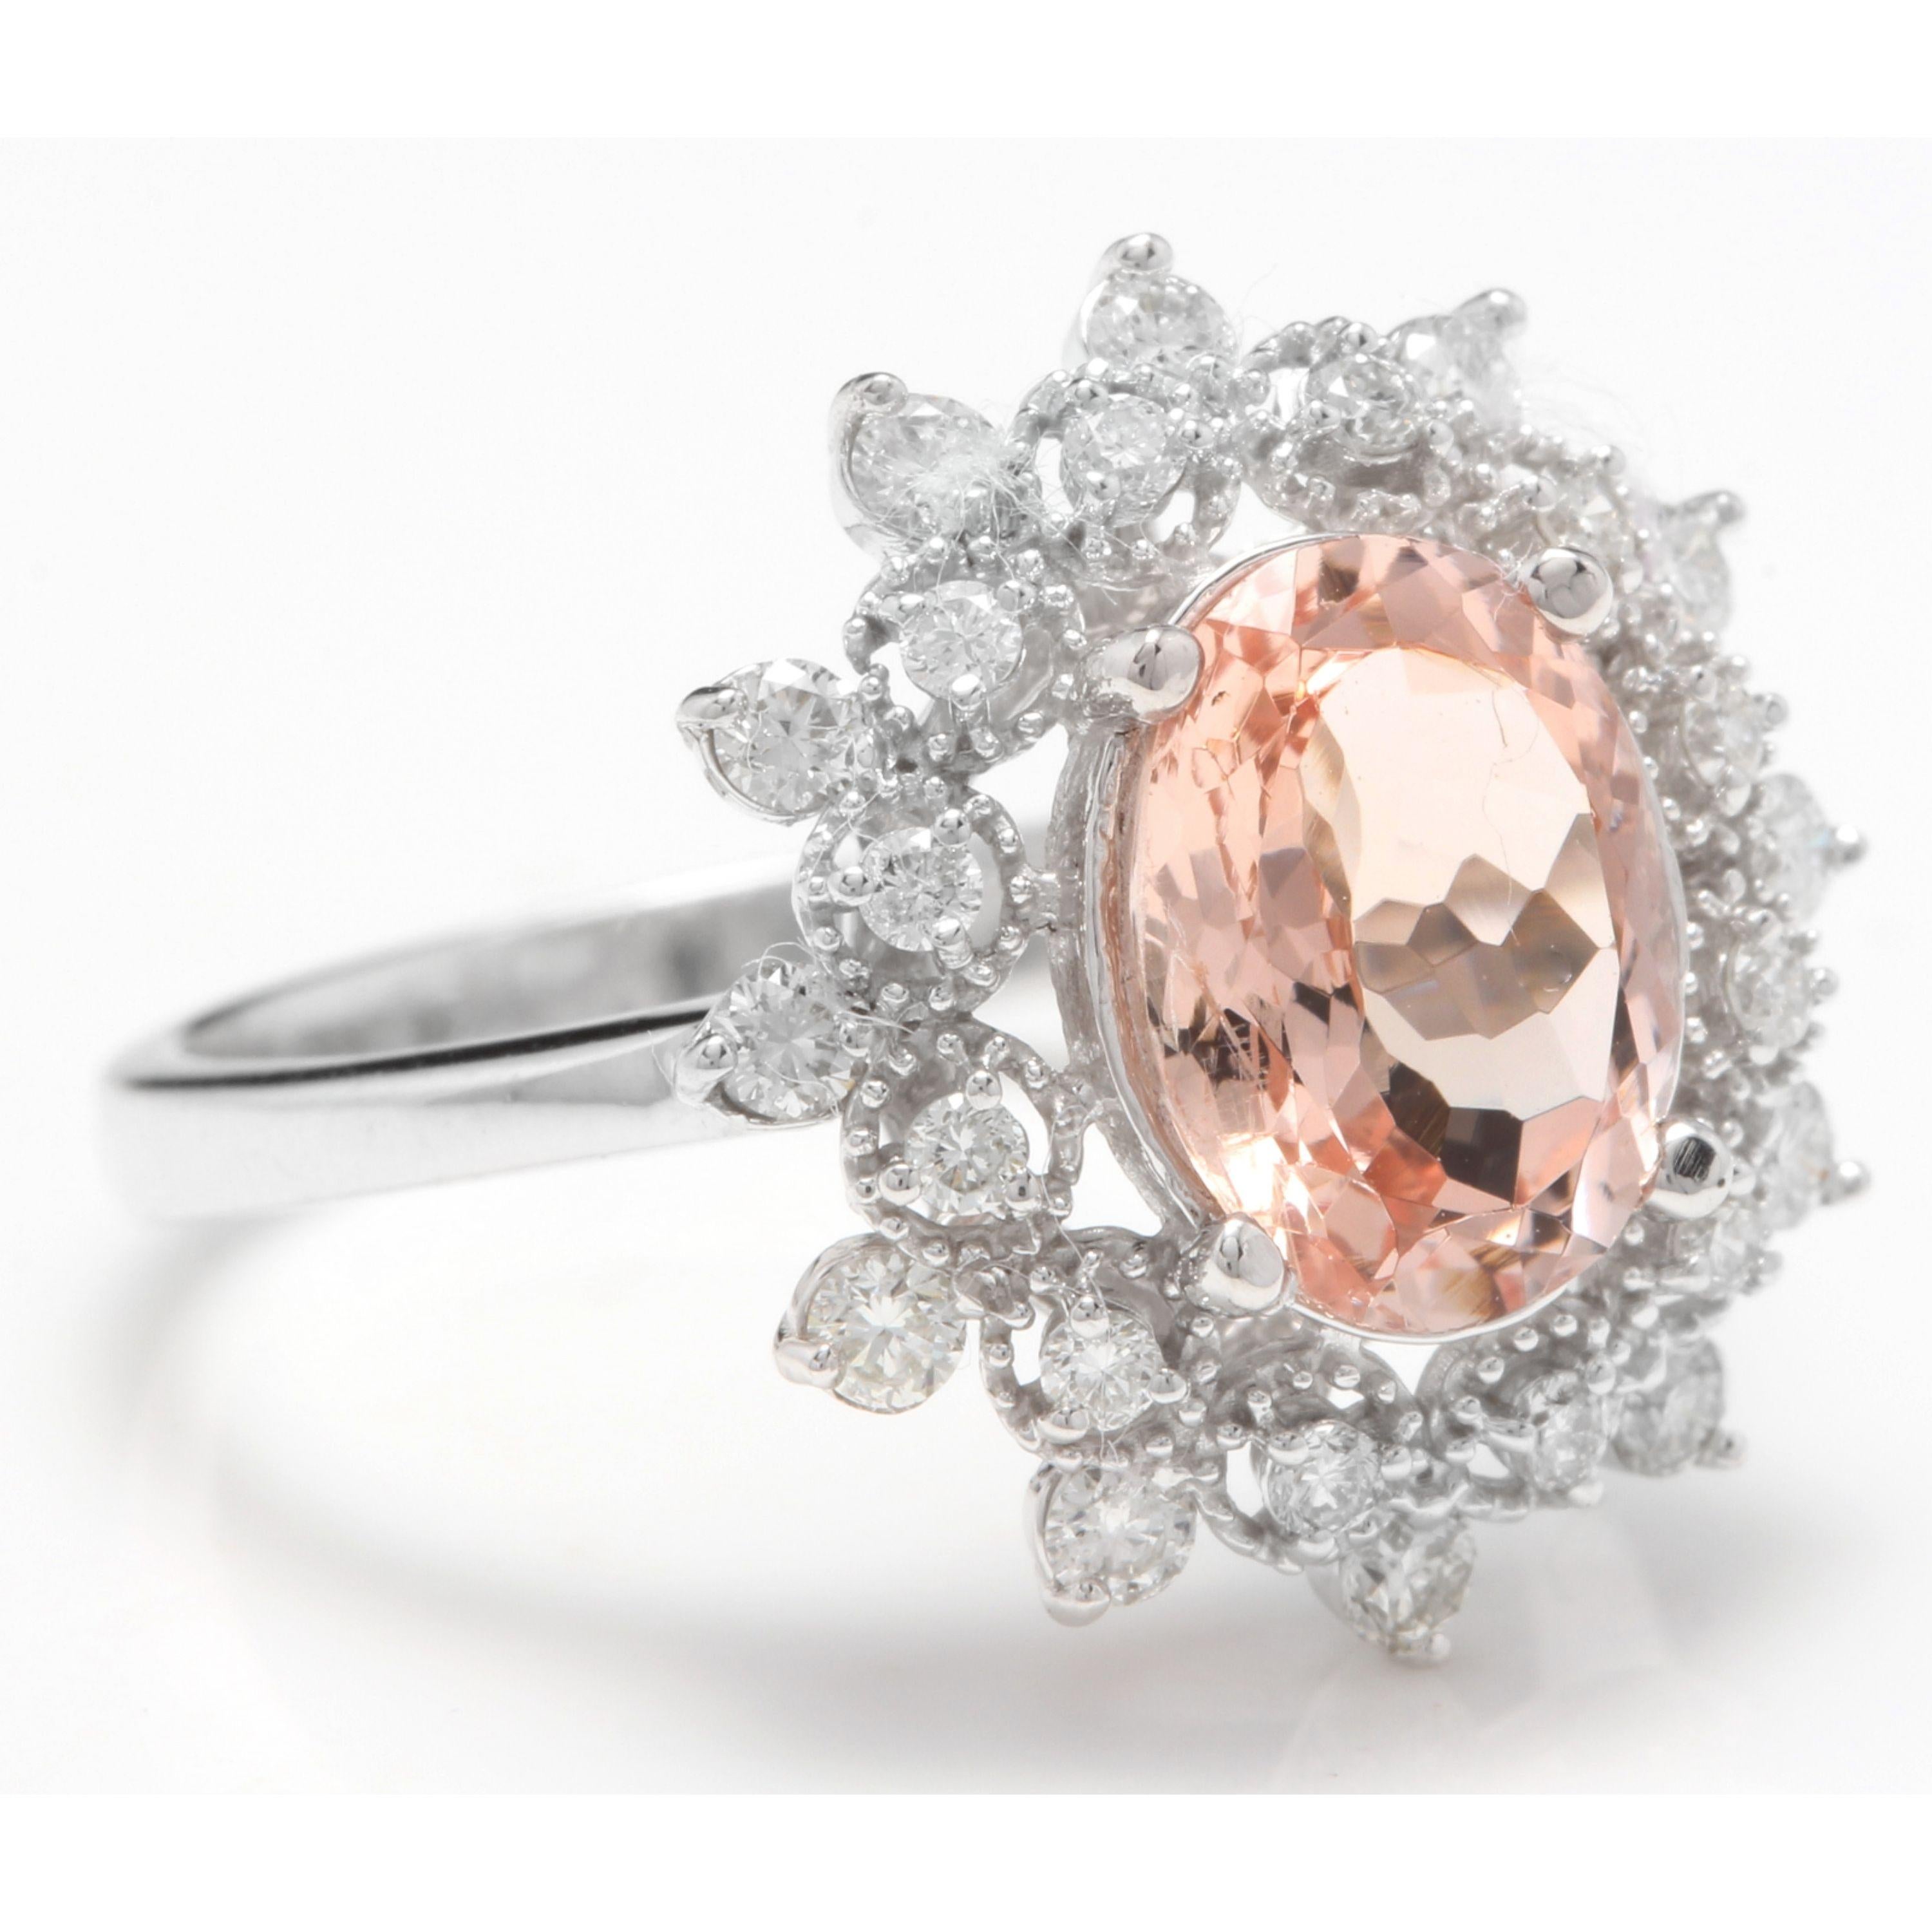 2.65 Carats Impressive Natural Morganite and Diamond 14K Solid White Gold Ring

Total Morganite Weight is: Approx. 2.00 Carats

Morganite Treatment: Heating

Morganite Measures: Approx. 10.00 x 7.50mm

Natural Round Diamonds Weight: Approx. 0.65